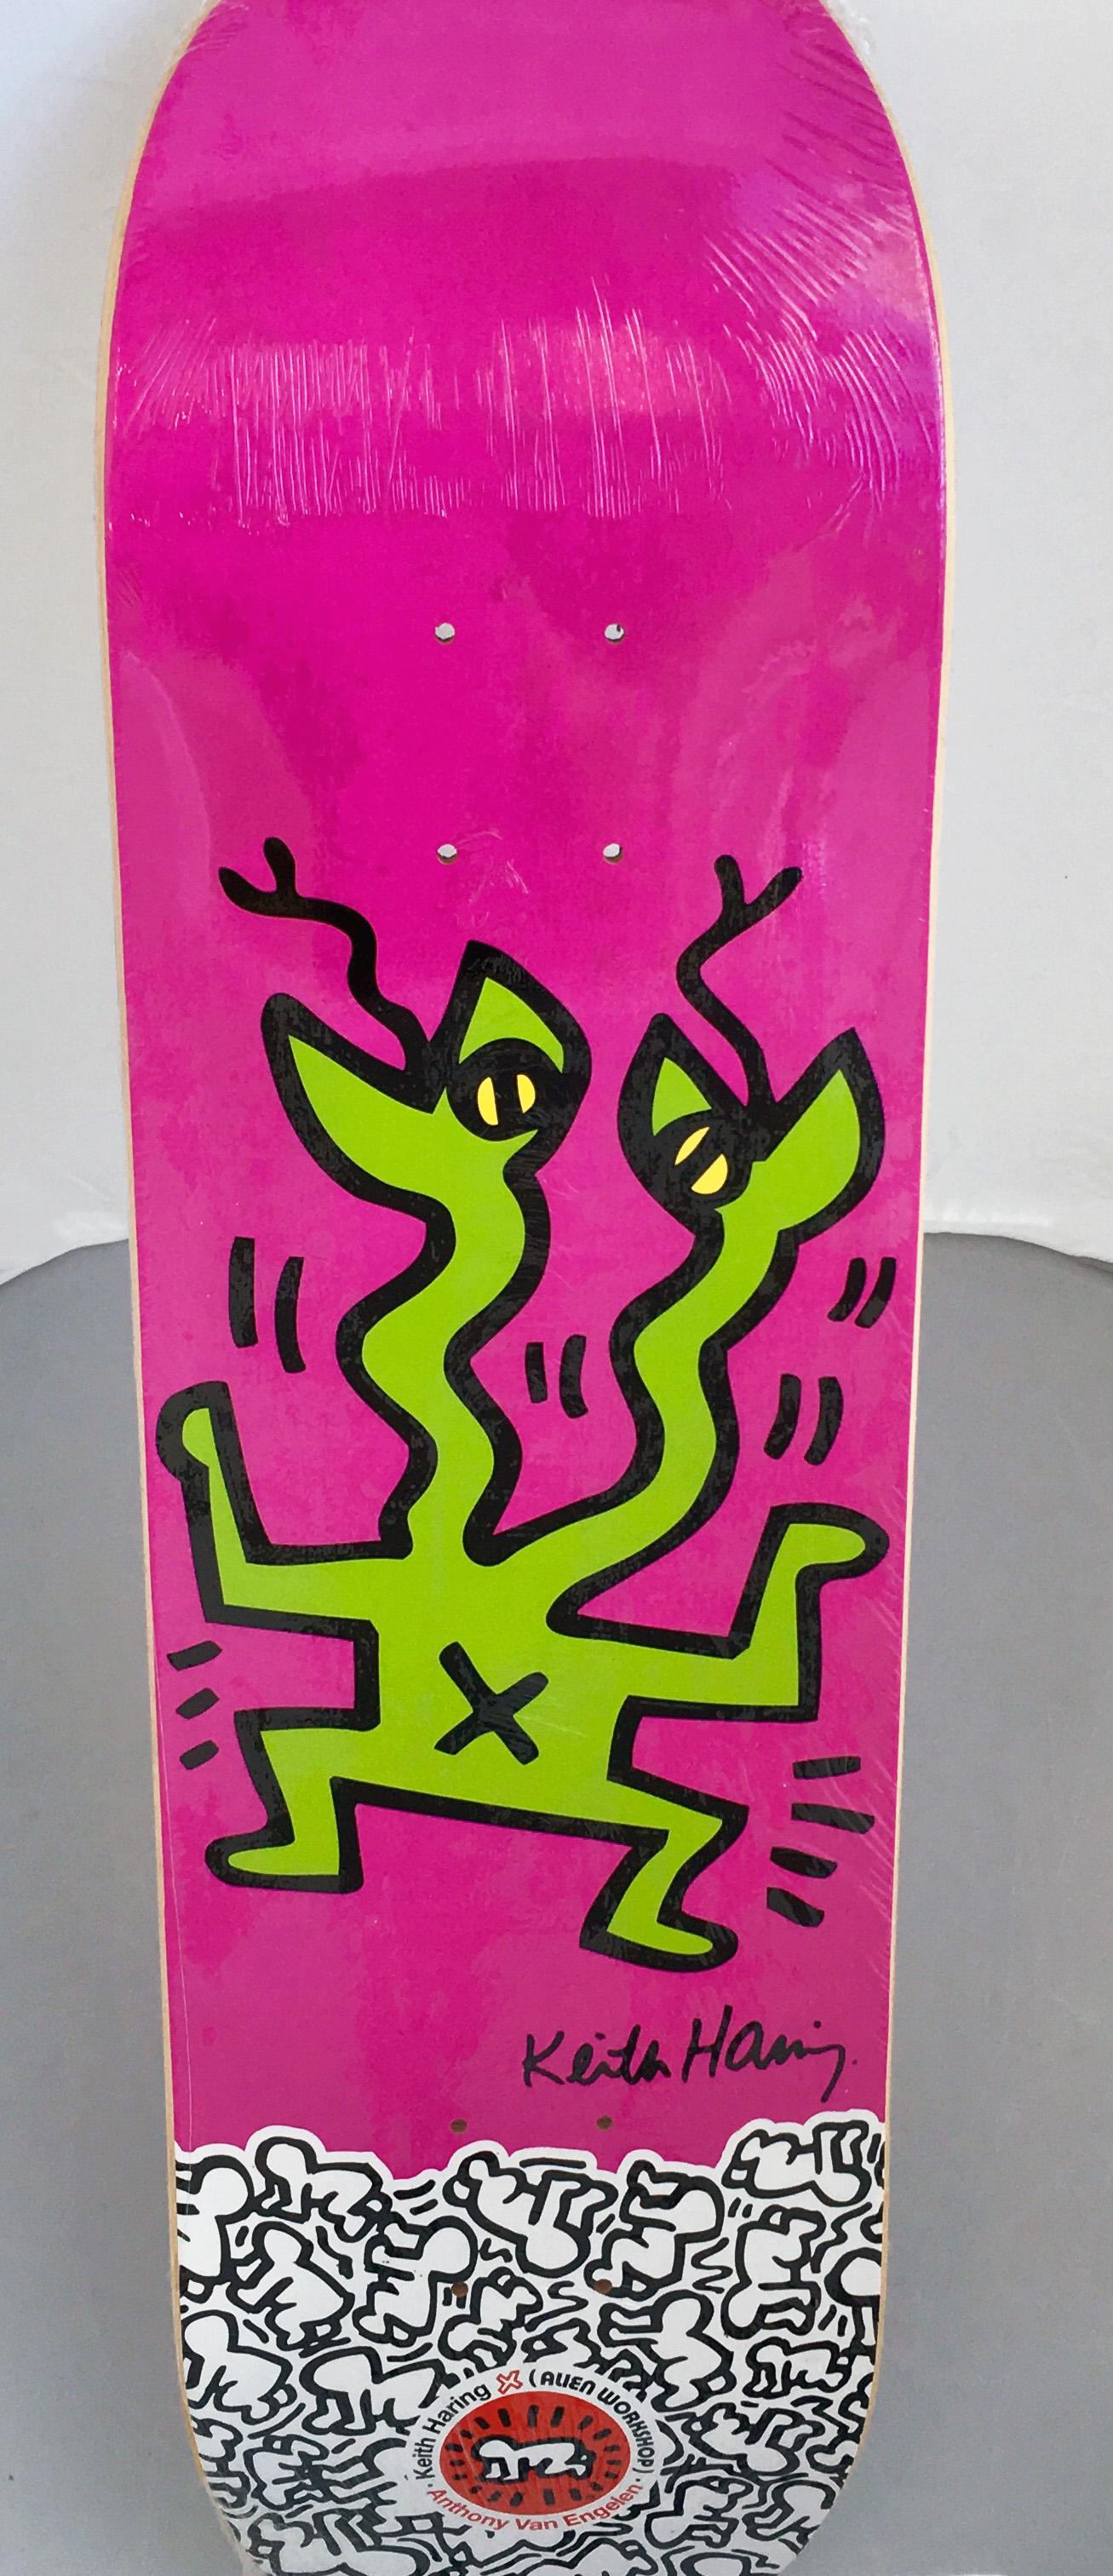 Keith Haring Skateboard Deck (Purple) - Art by (after) Keith Haring